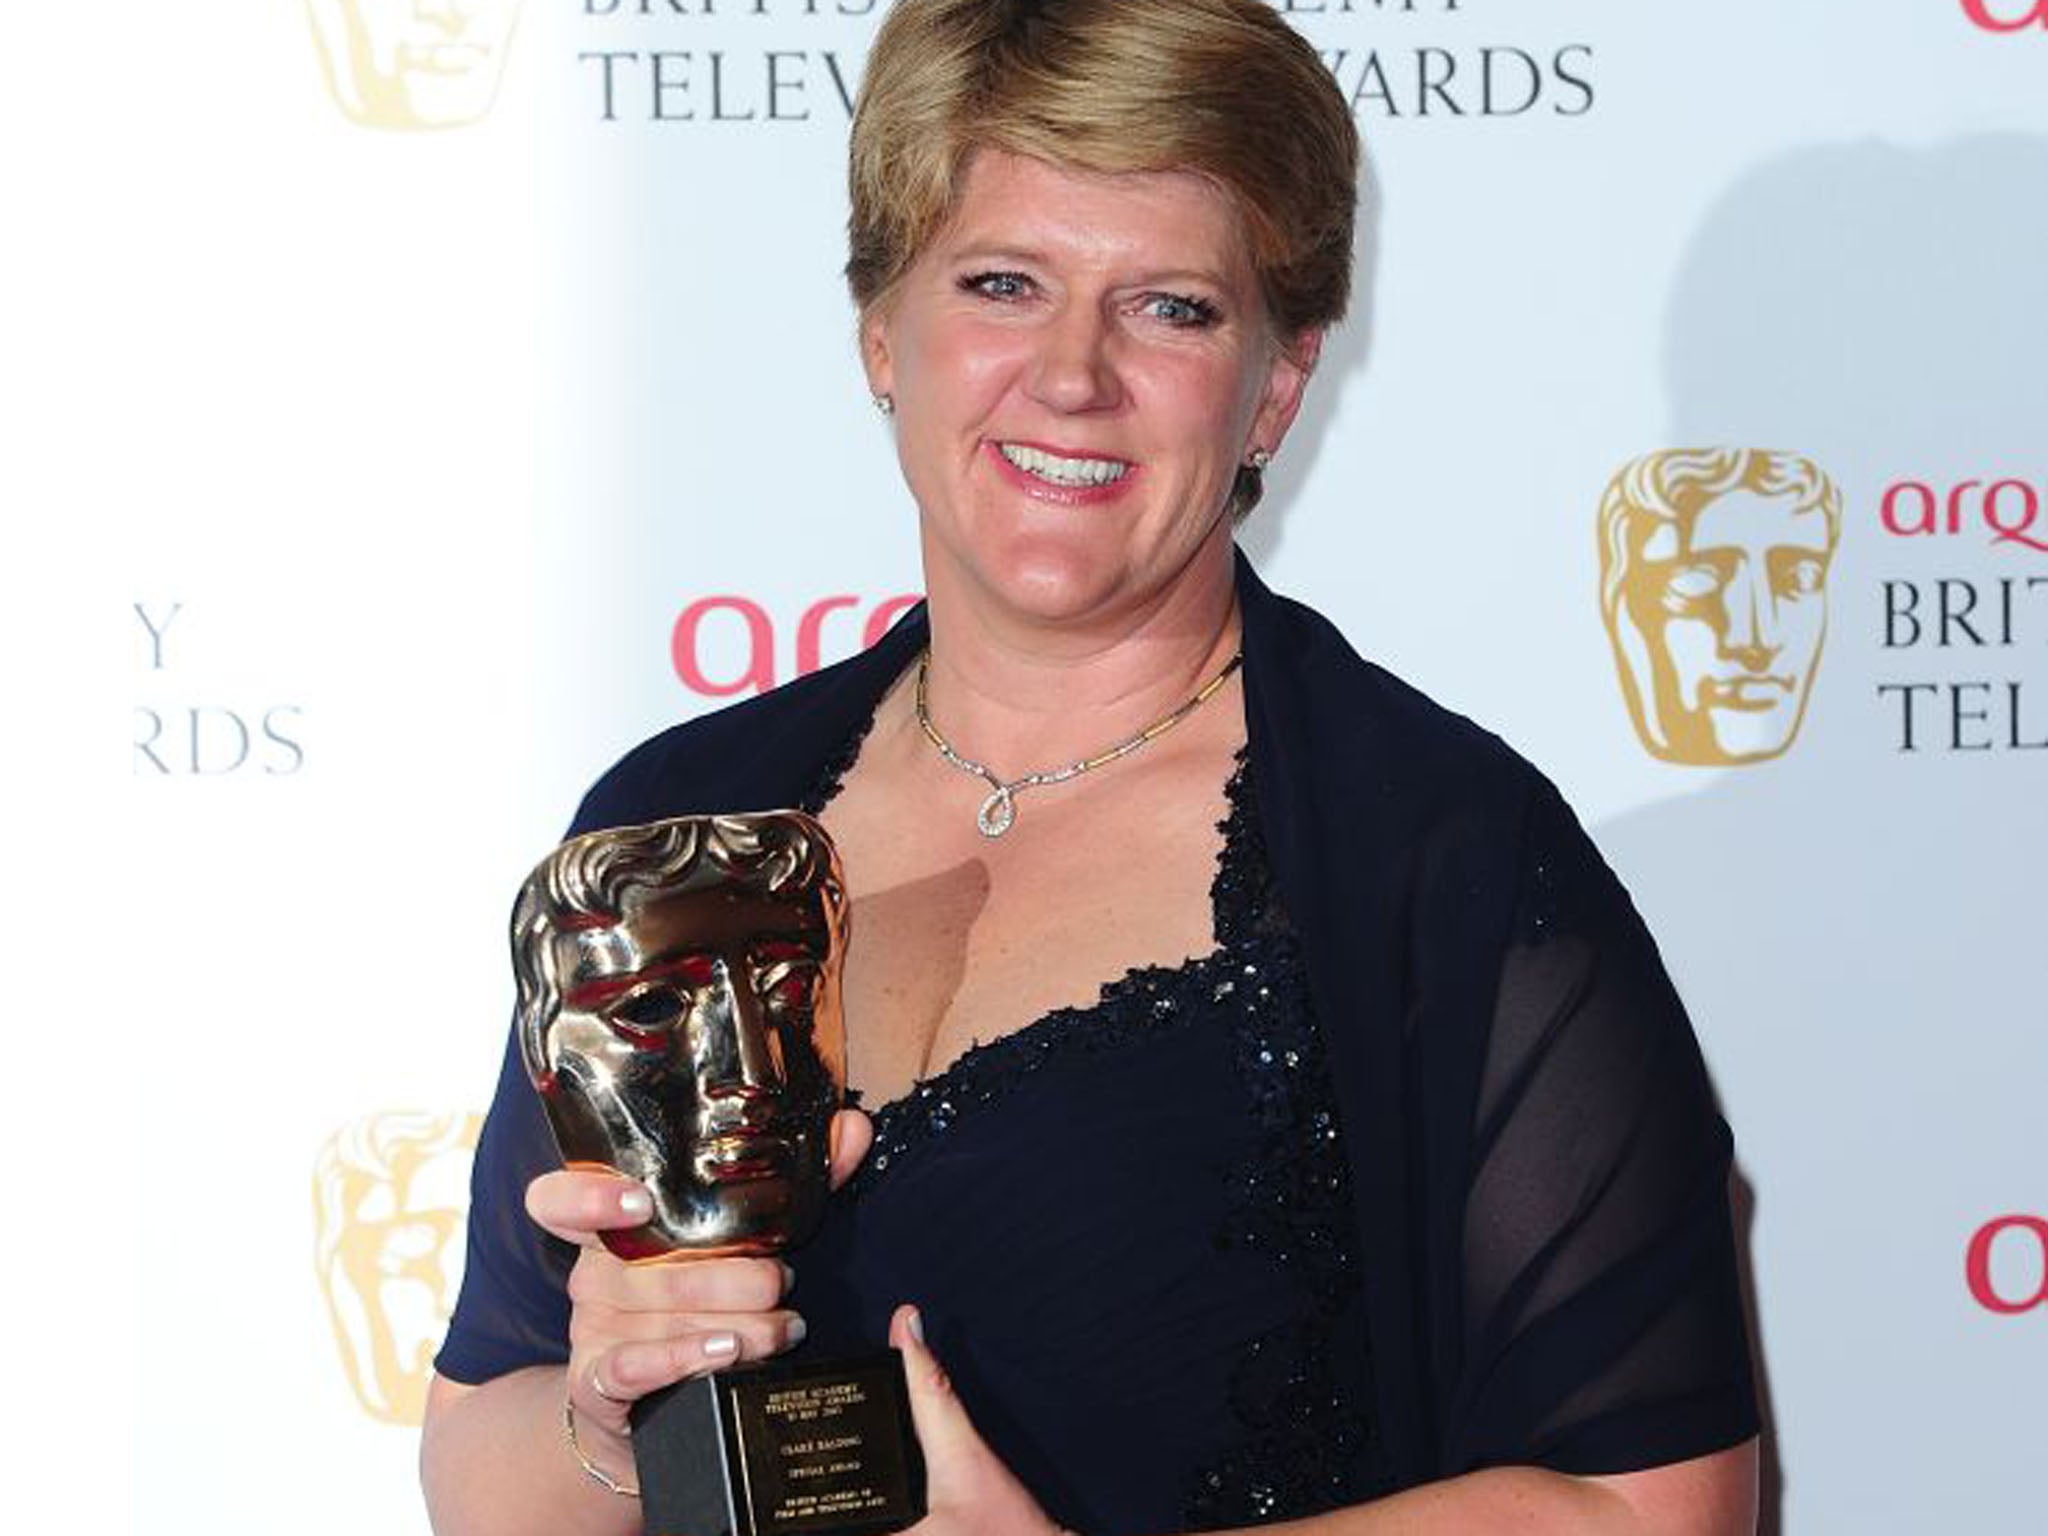 Clare Balding receives the special award for outstanding achievement in factual presenting, at the Bafta awards earlier this year (Ian West/PA)